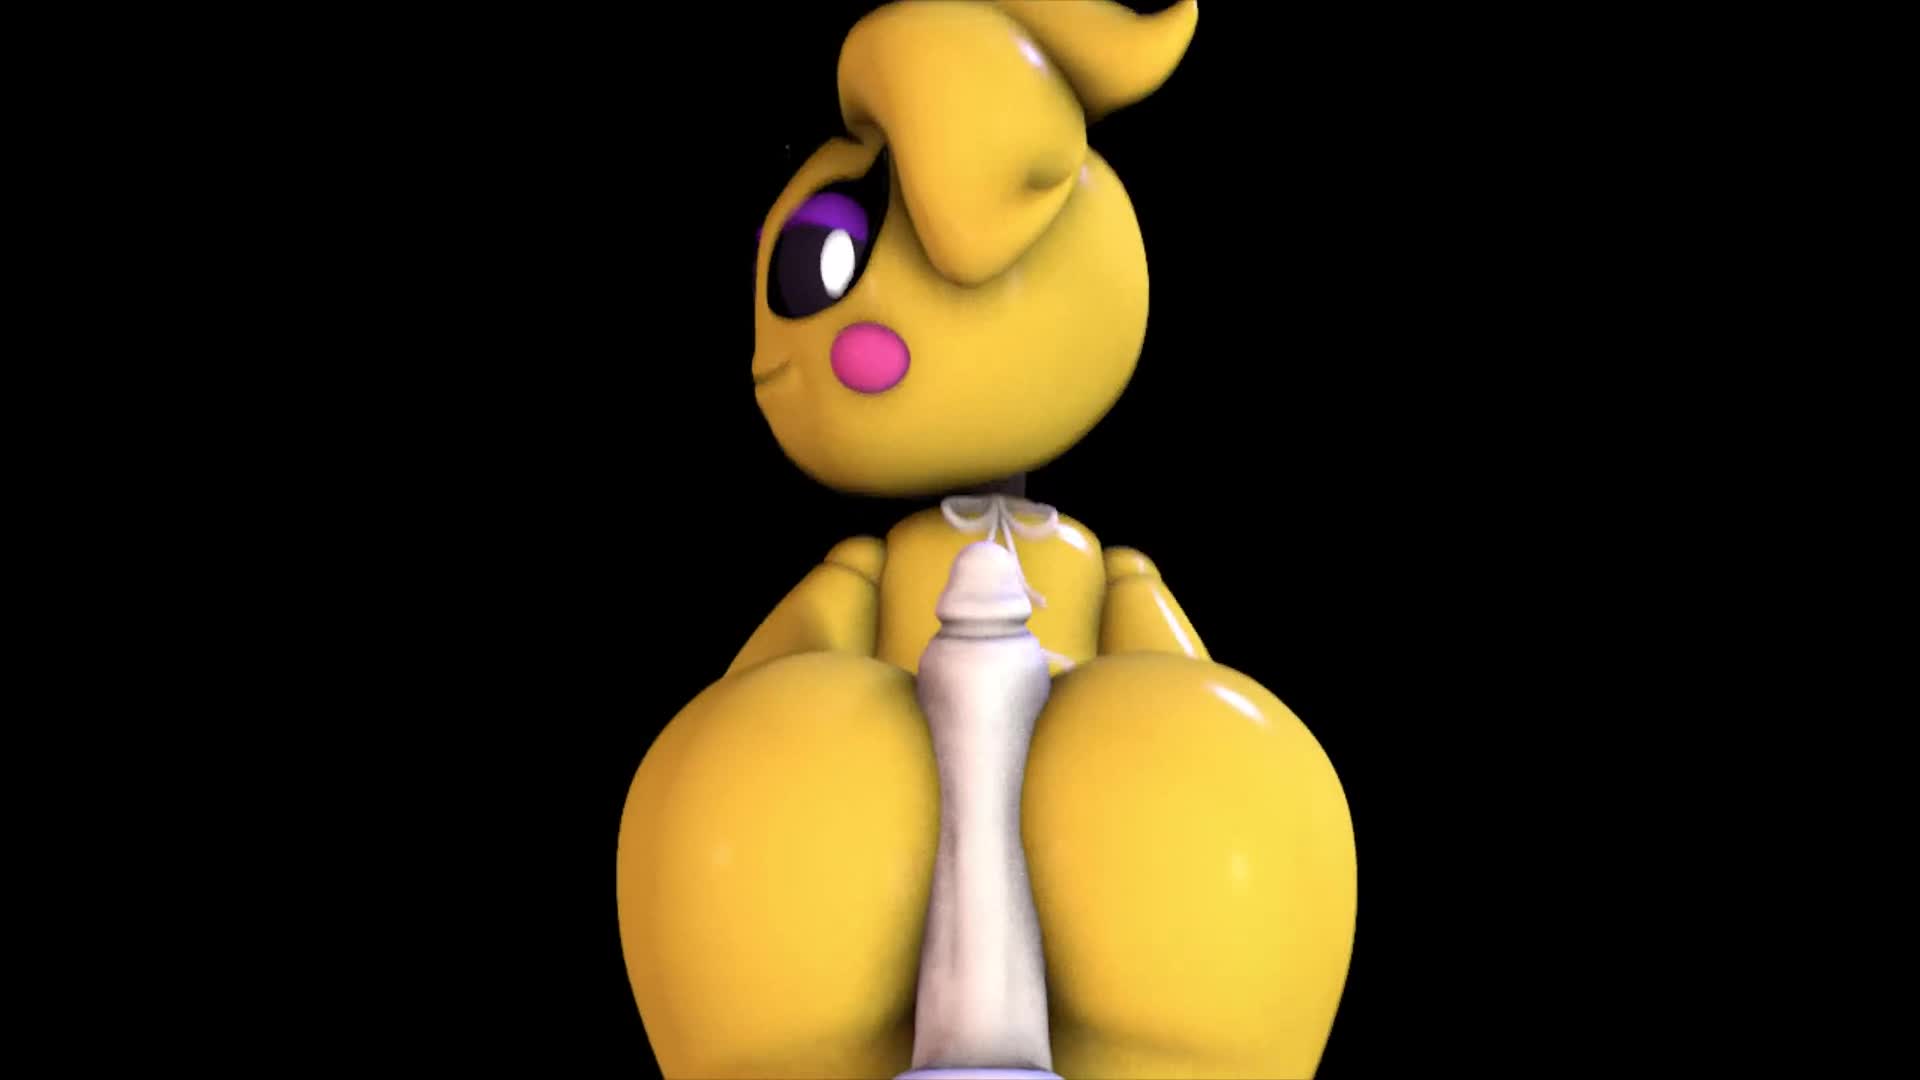 Toy chica rule 3r - 🧡 fnaf : Toy Chica 2 Five Nights At Freddy's Amin...